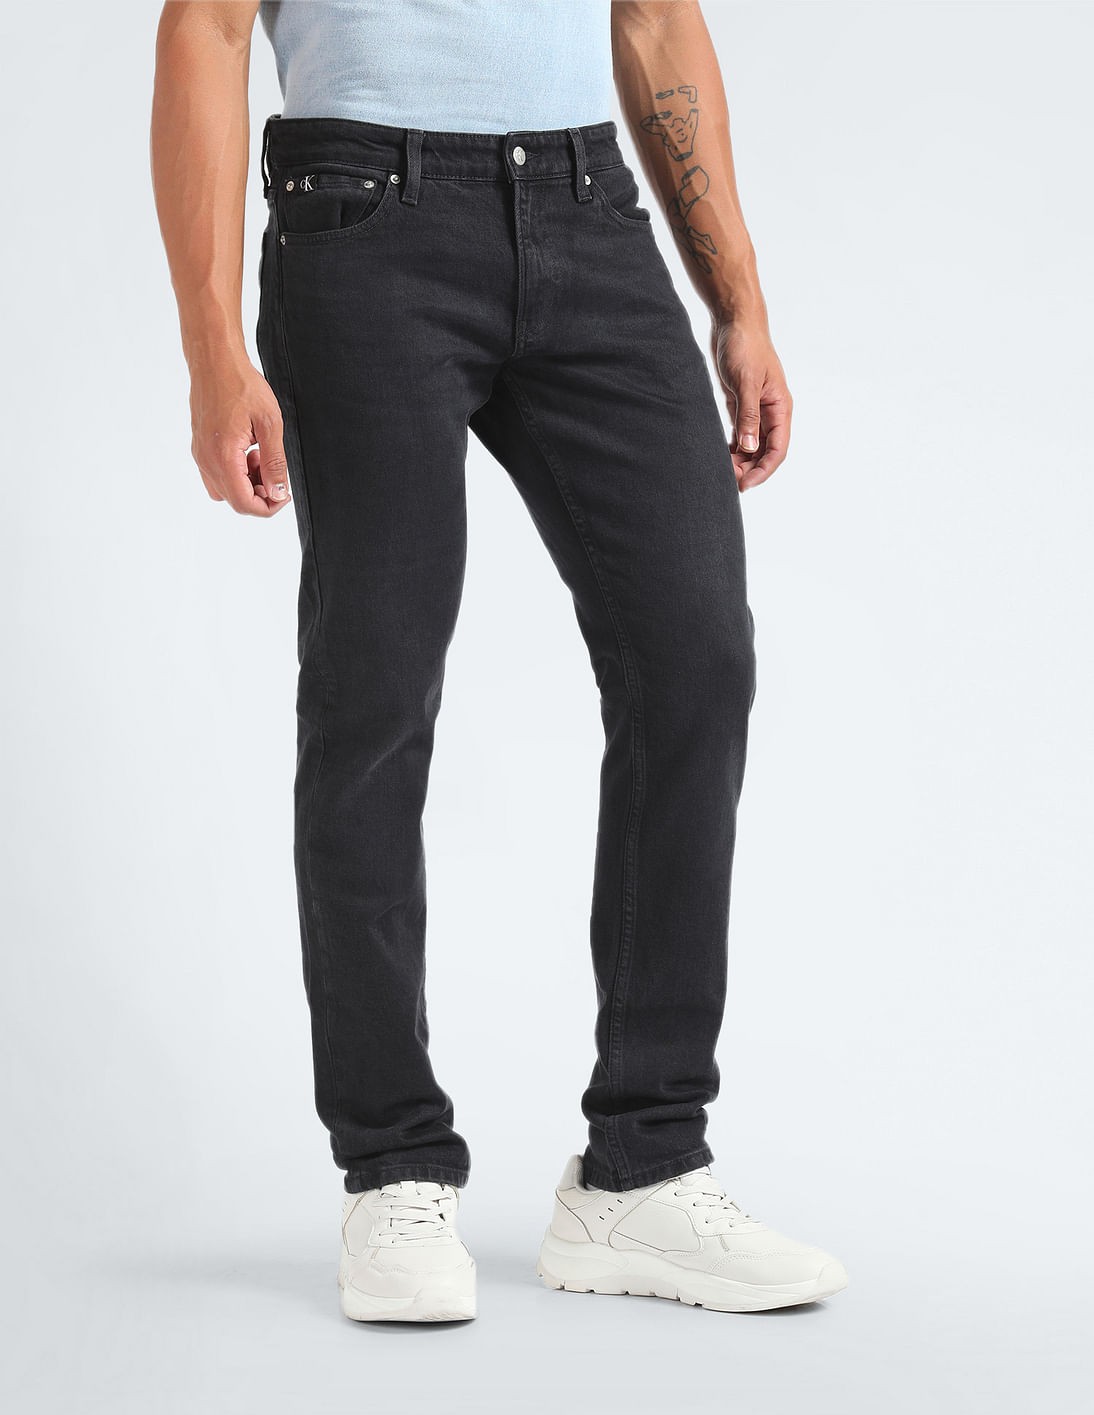 Buy Calvin Klein Recycled Cotton Slim Fit Jeans - NNNOW.com